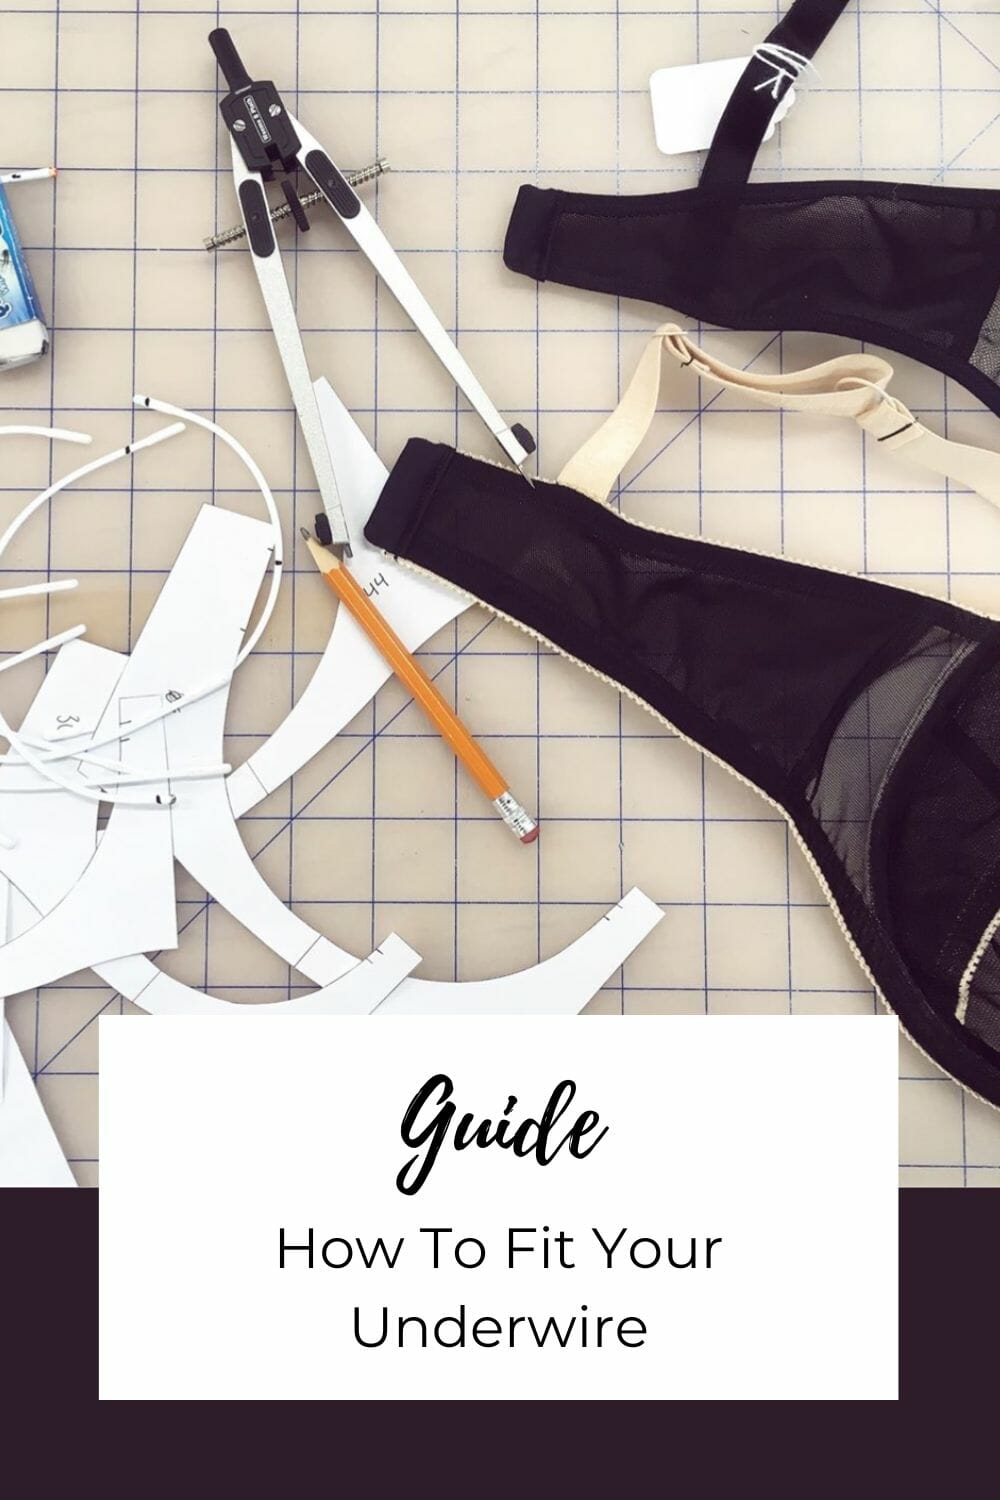 How To Fit Your Underwire and other underwire mysteries